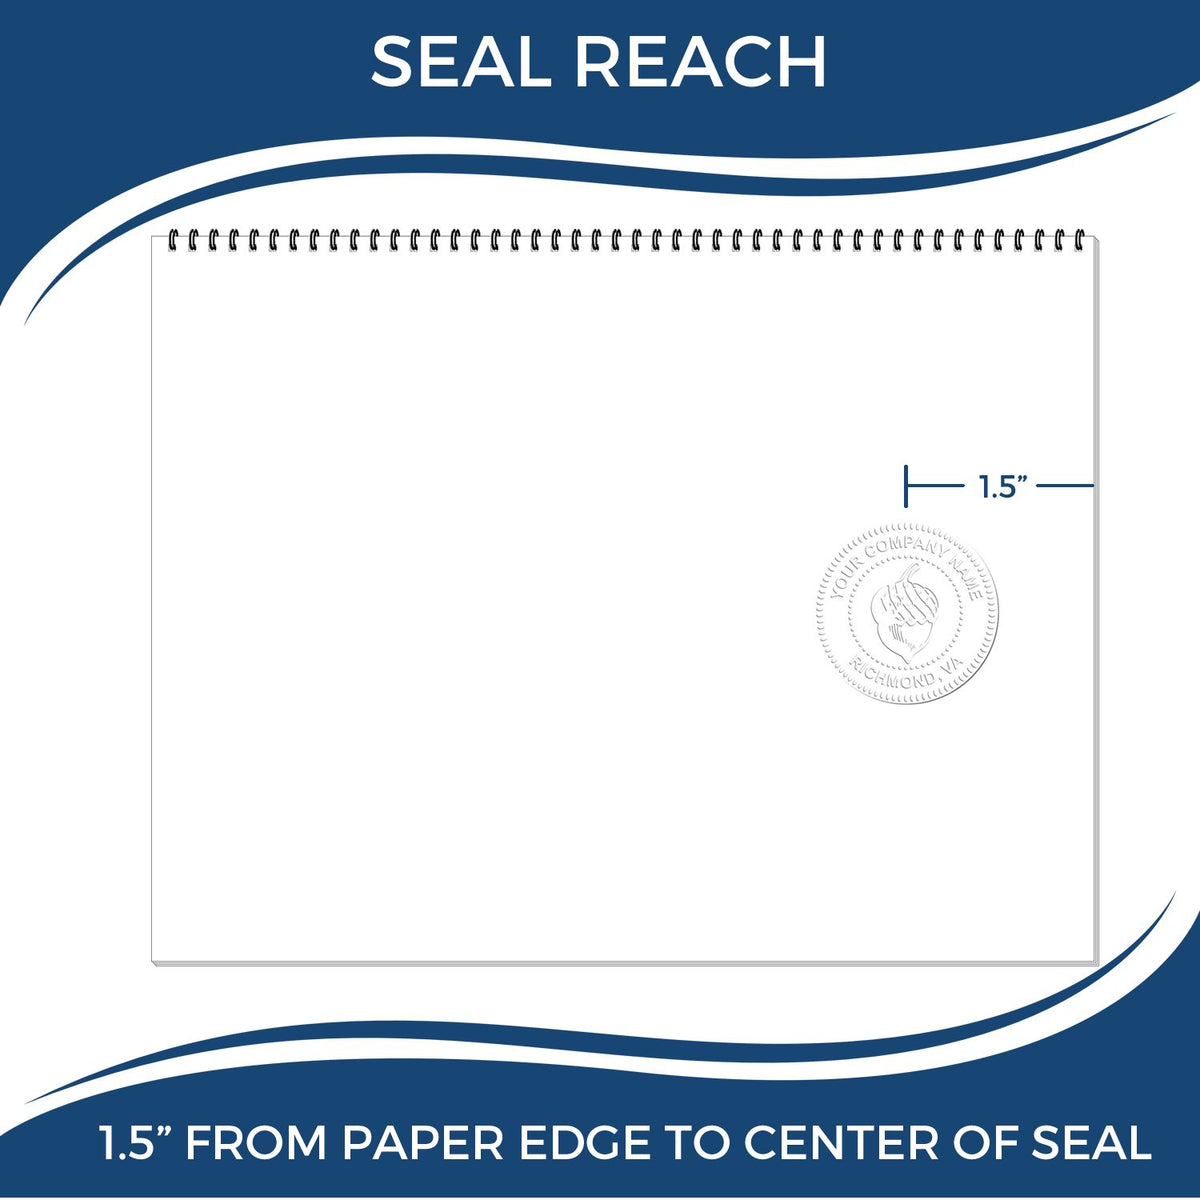 An infographic showing the seal reach which is represented by a ruler and a miniature seal image of the Gift Montana Landscape Architect Seal